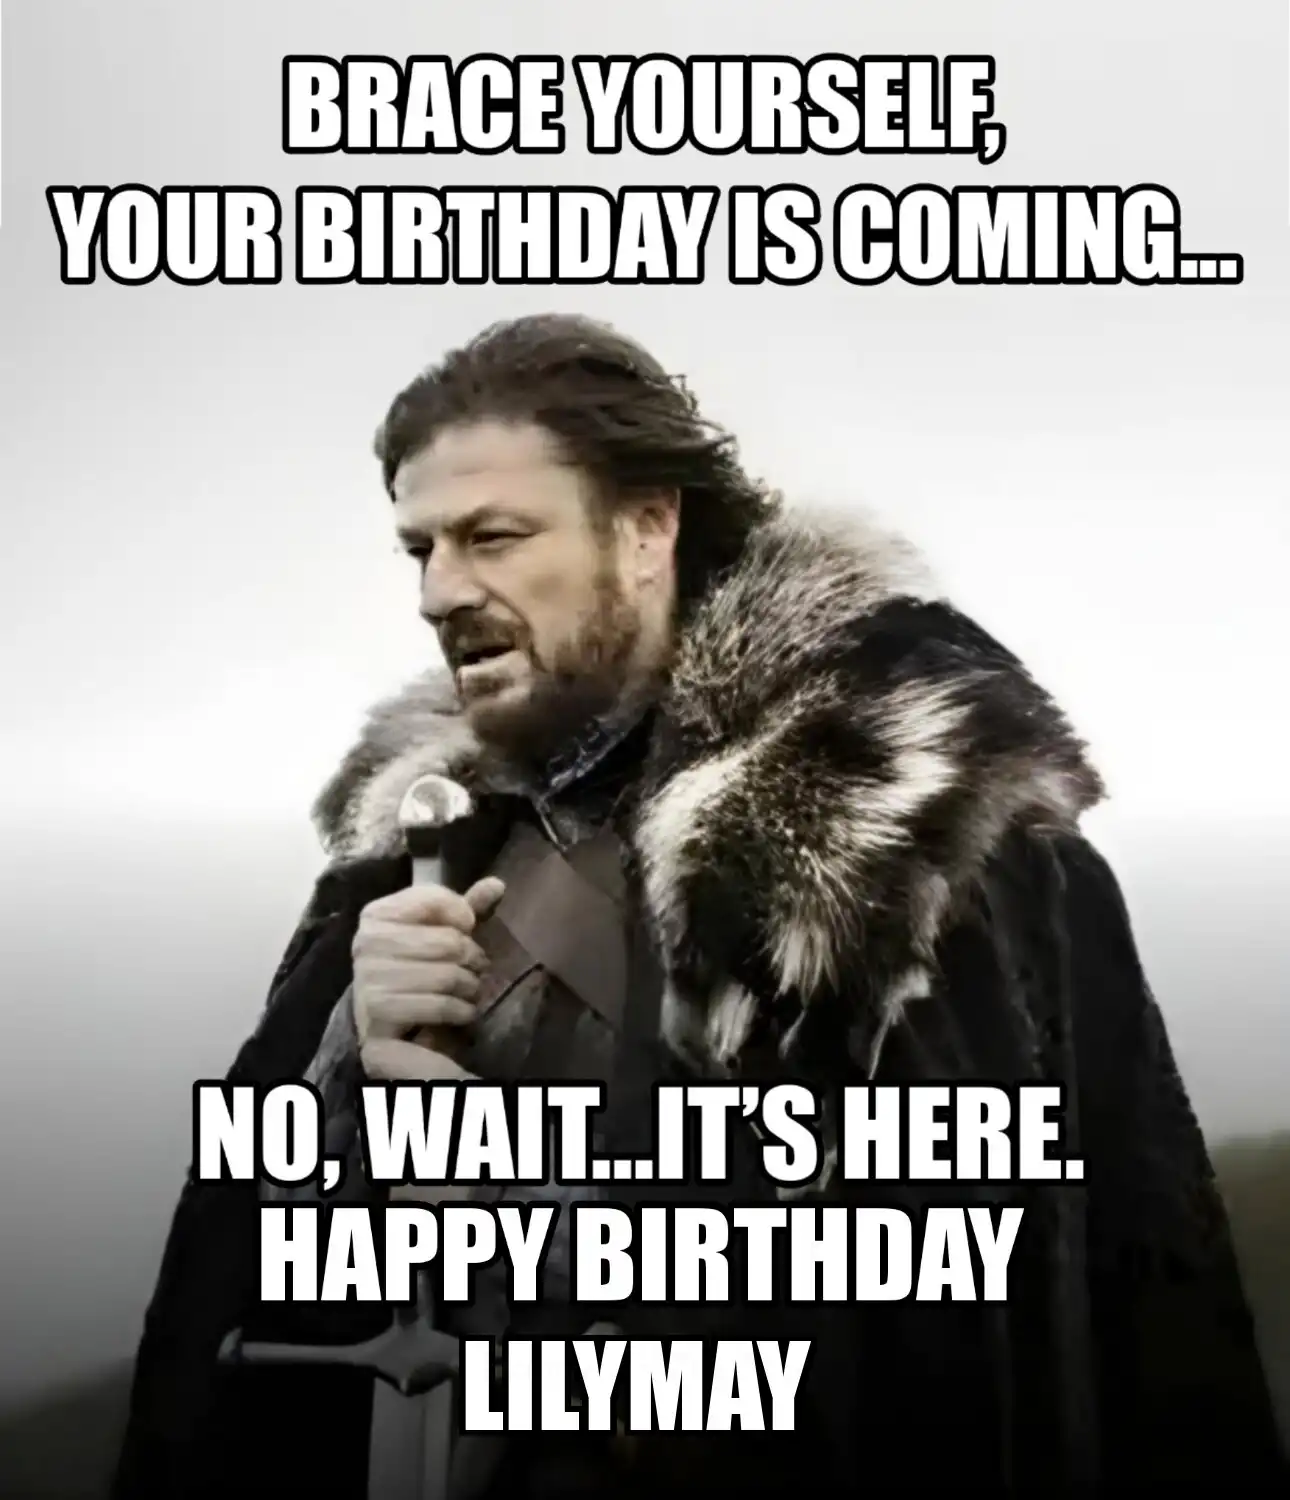 Happy Birthday Lilymay Brace Yourself Your Birthday Is Coming Meme